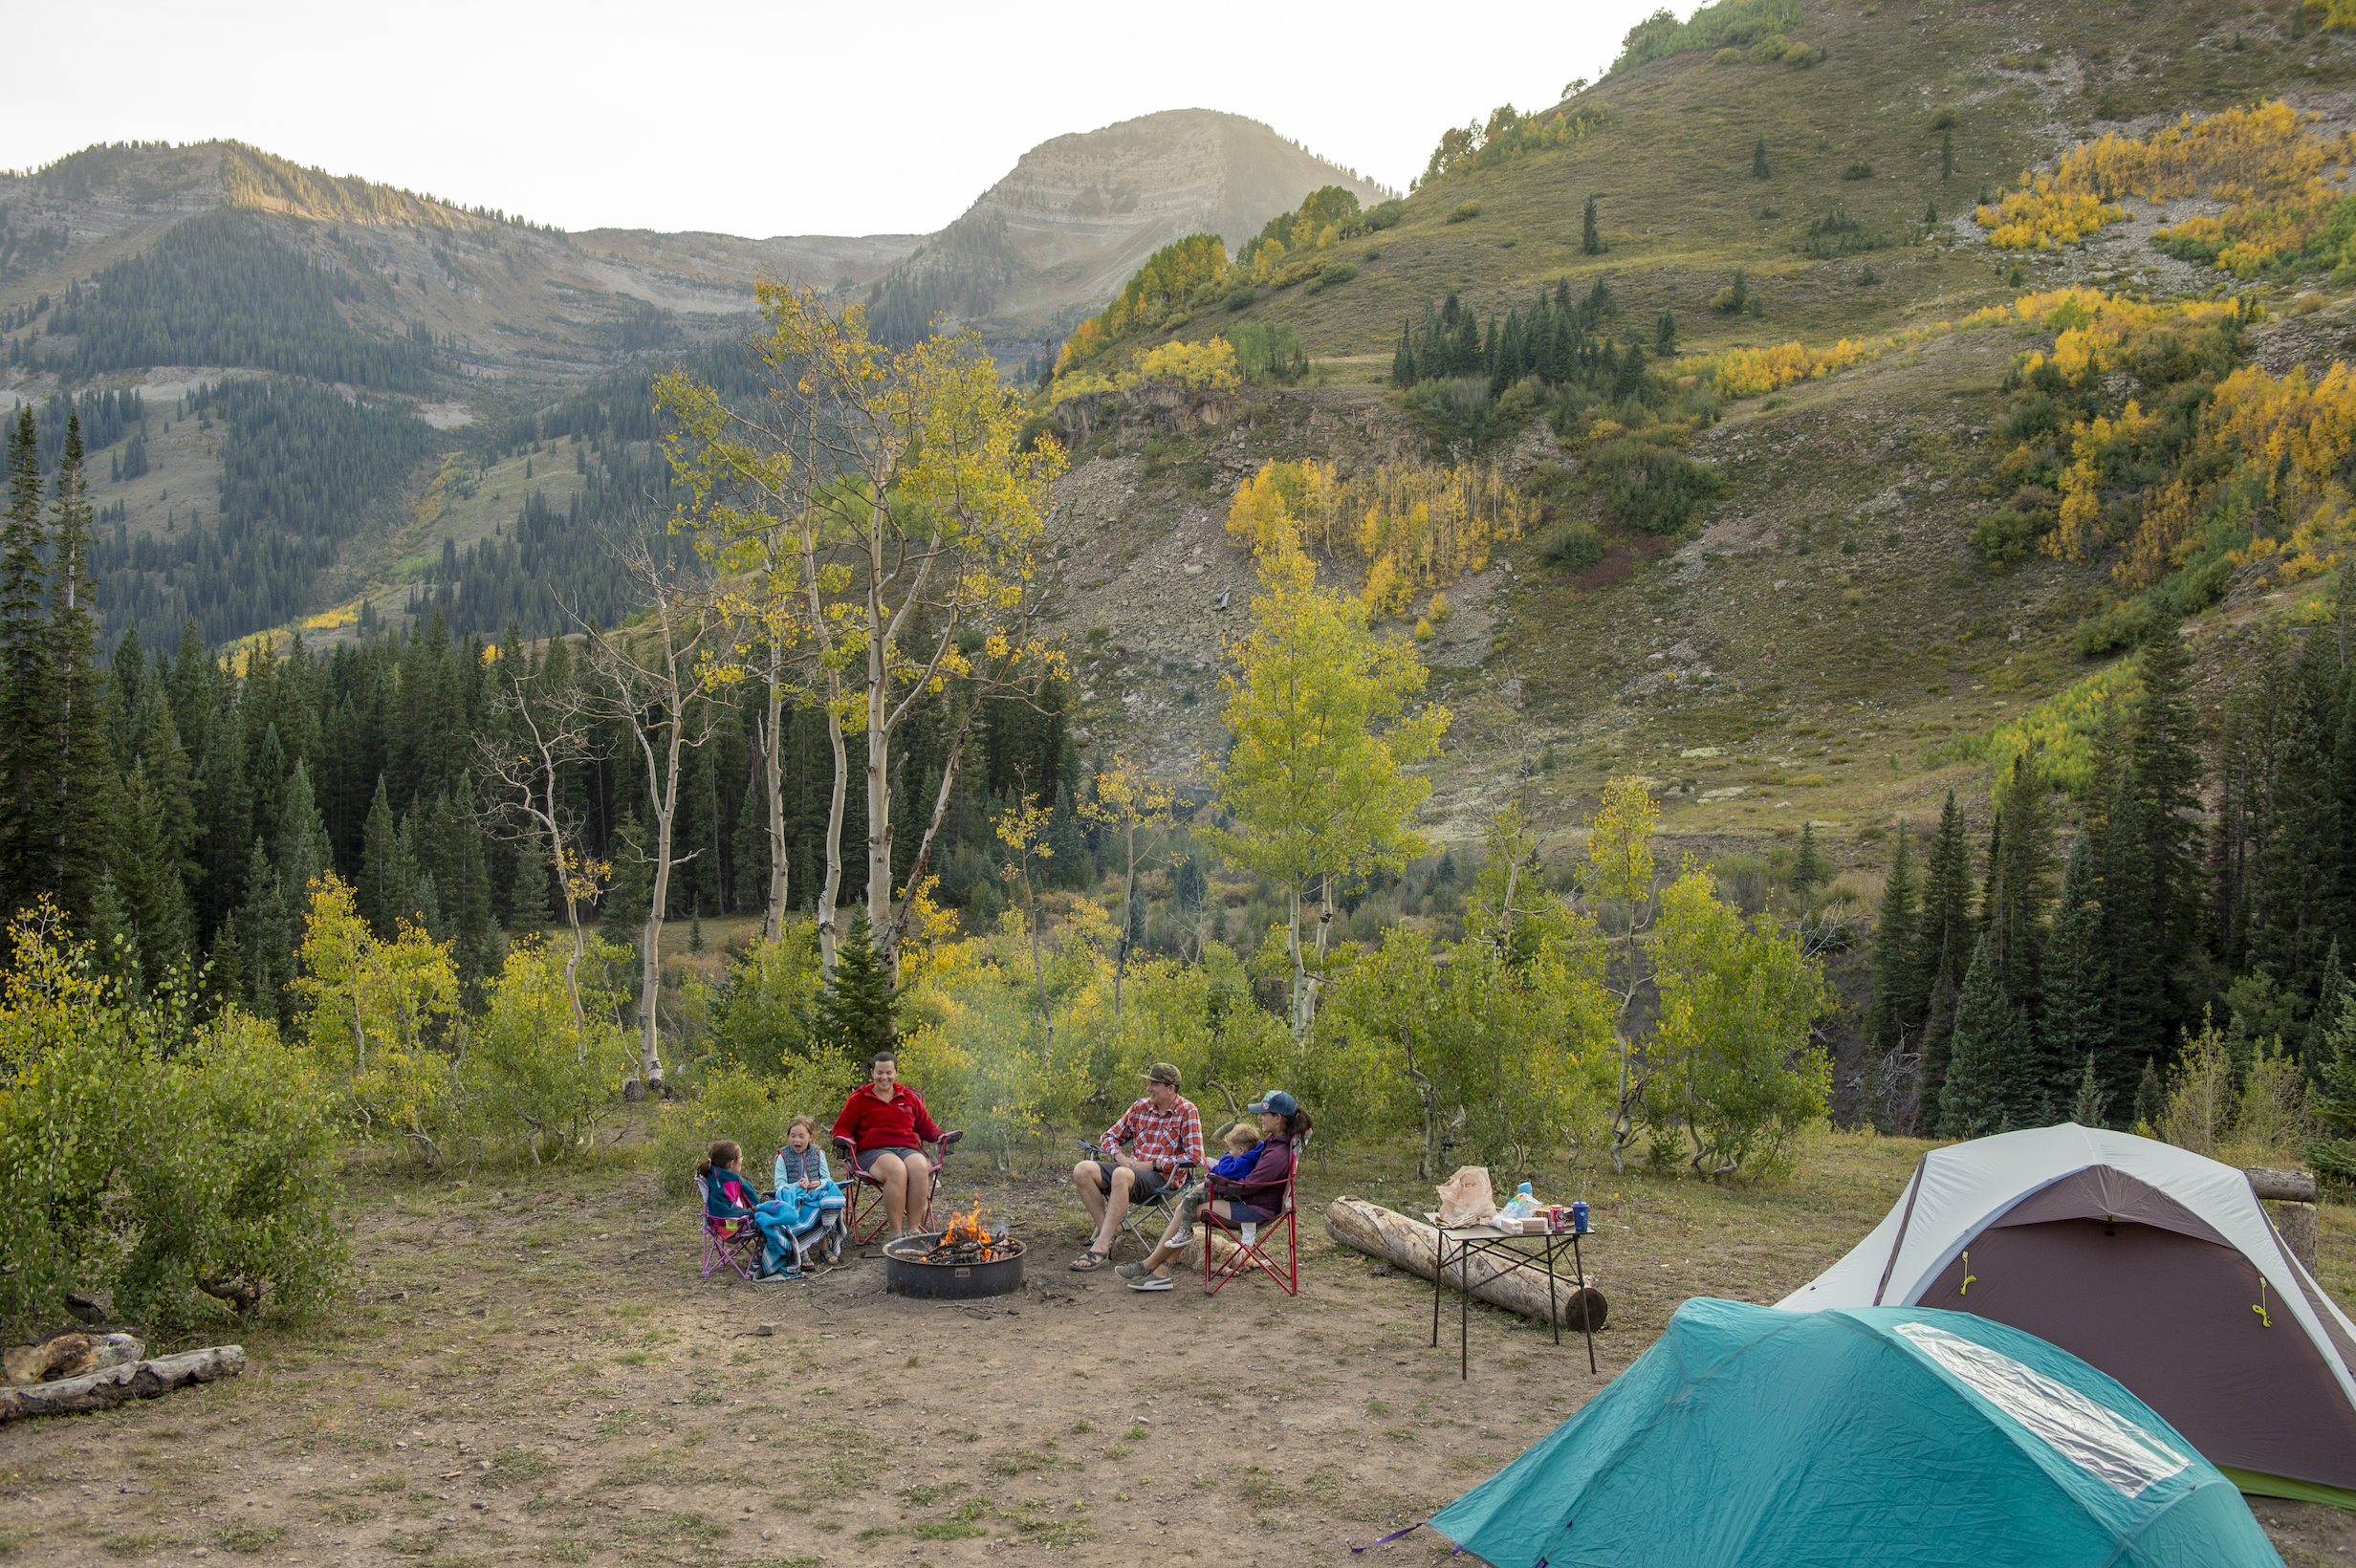 Family camping in a designated camping area.
Slate River Valley
Crested Butte, CO